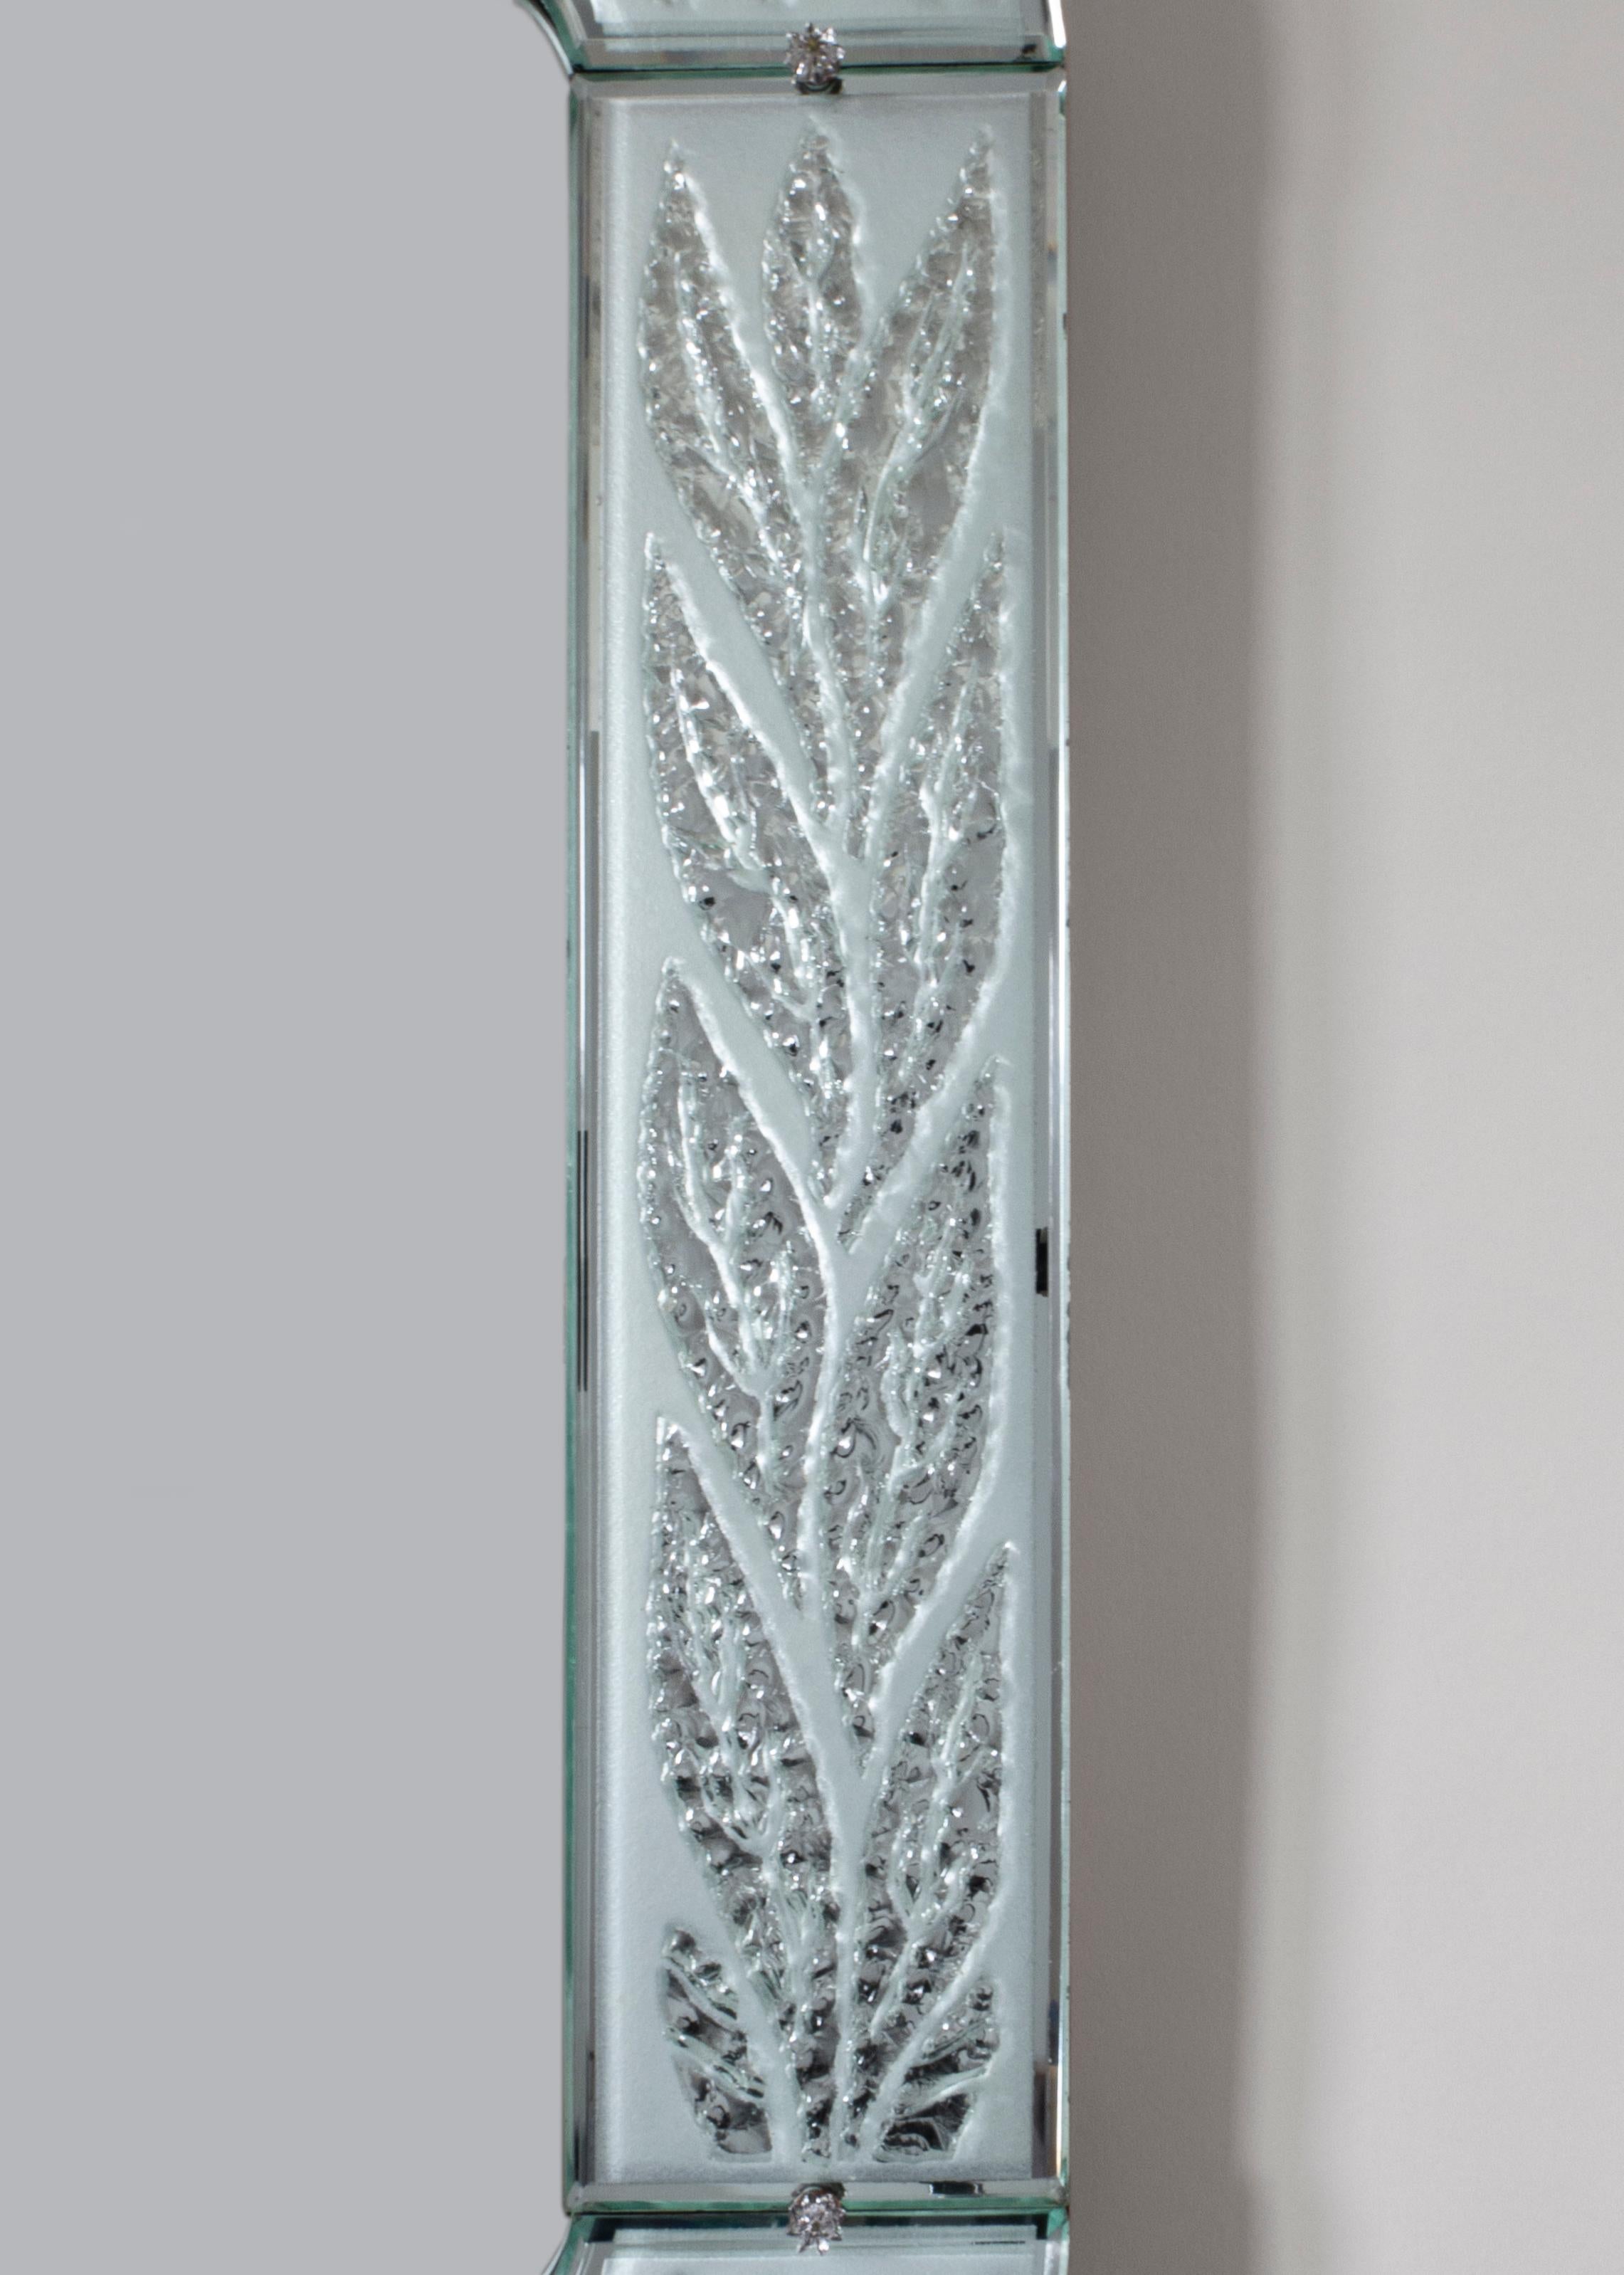 The rectangular mirror plate with rounded corners, within a conforming frame of chiseled and frosted glass panels depicting foliate, each panel with a soft blue-green tint, the corner panels subtlety projecting inwards, fastened by metal clips and